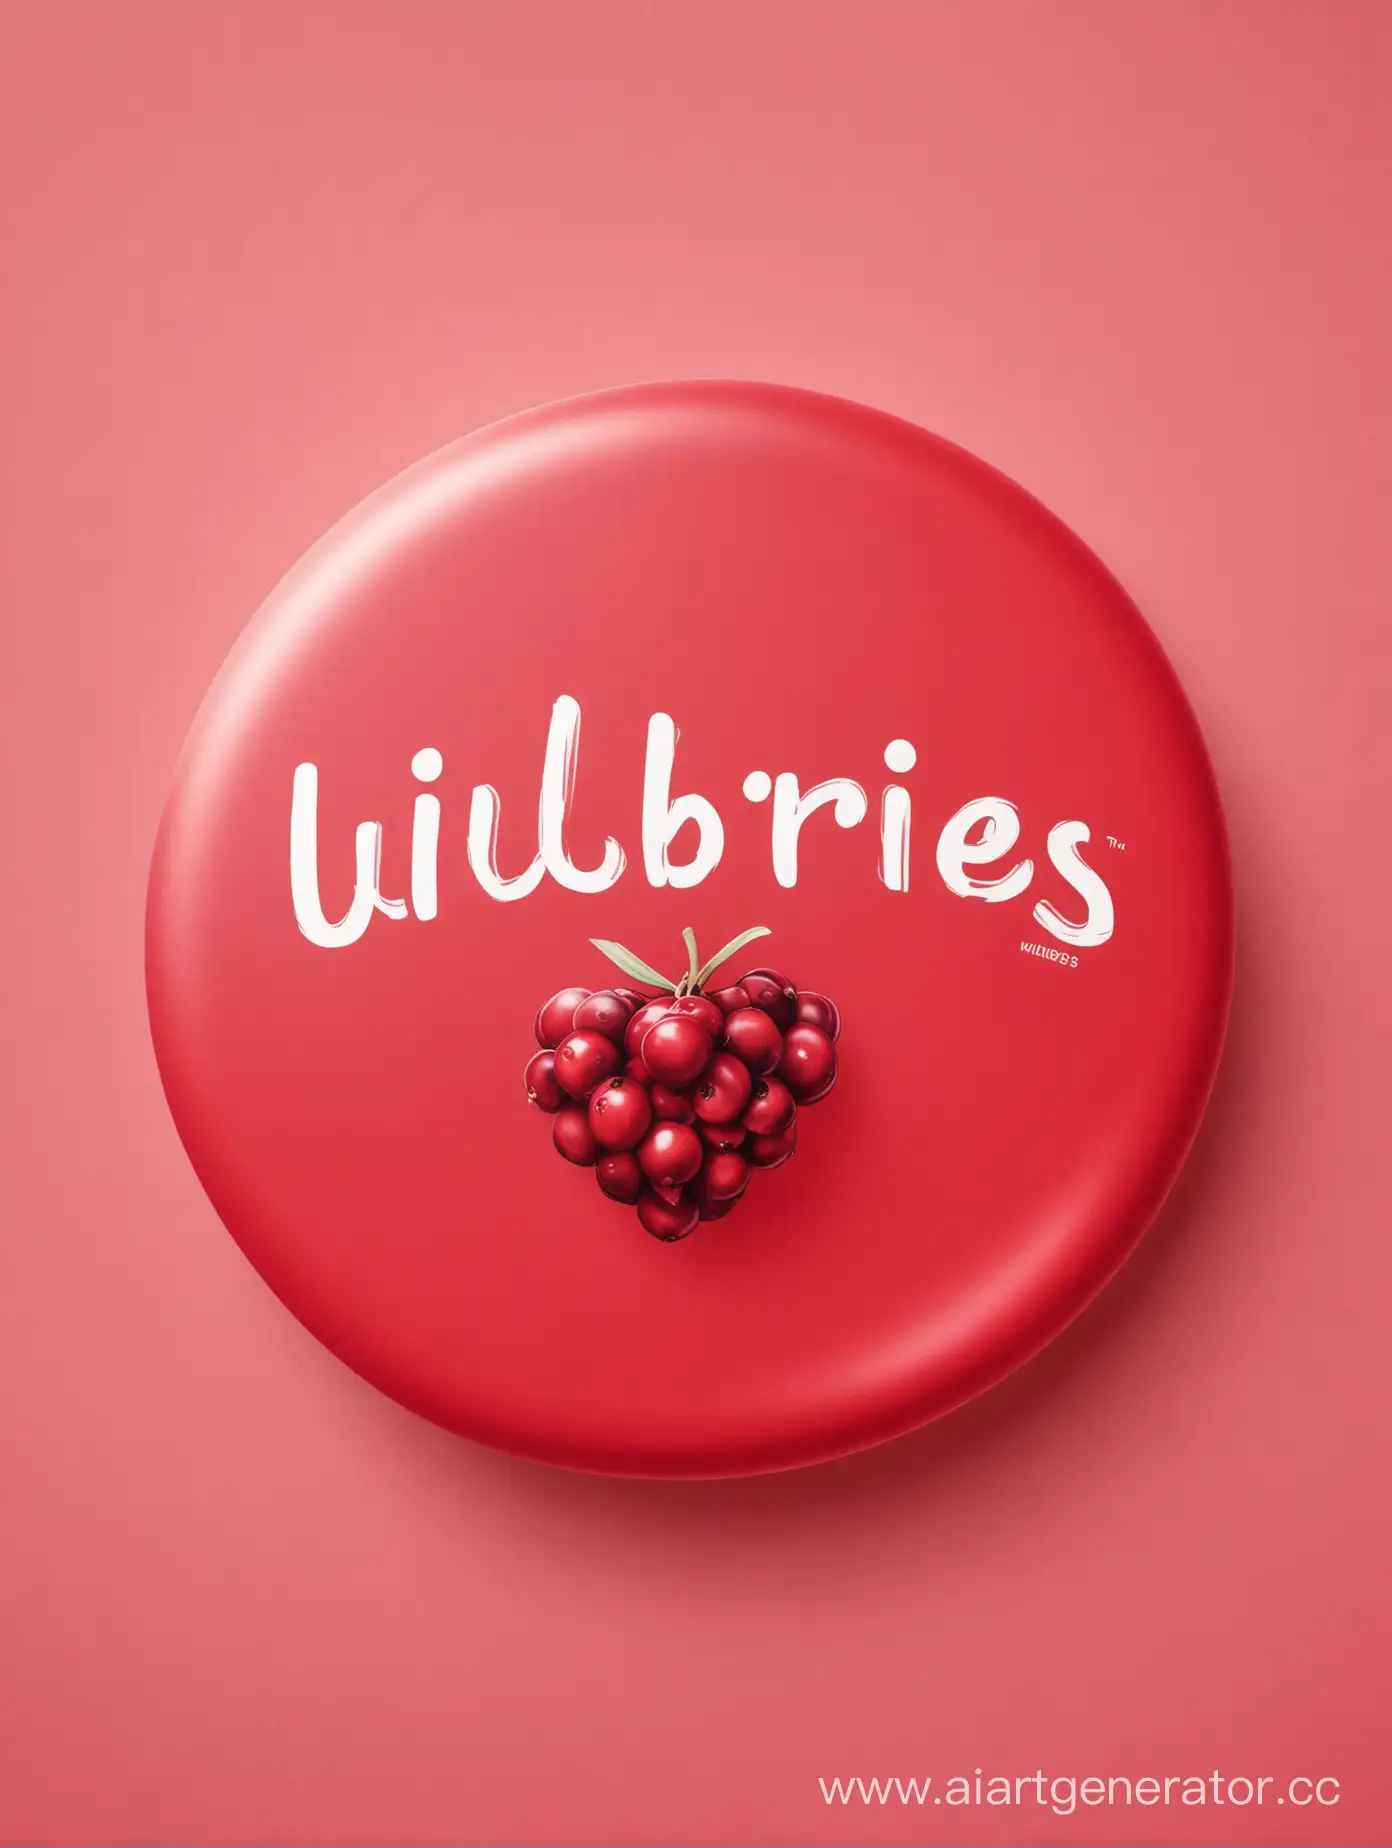 Wildberries-Logo-Vibrant-Red-Round-Berry-with-Volume